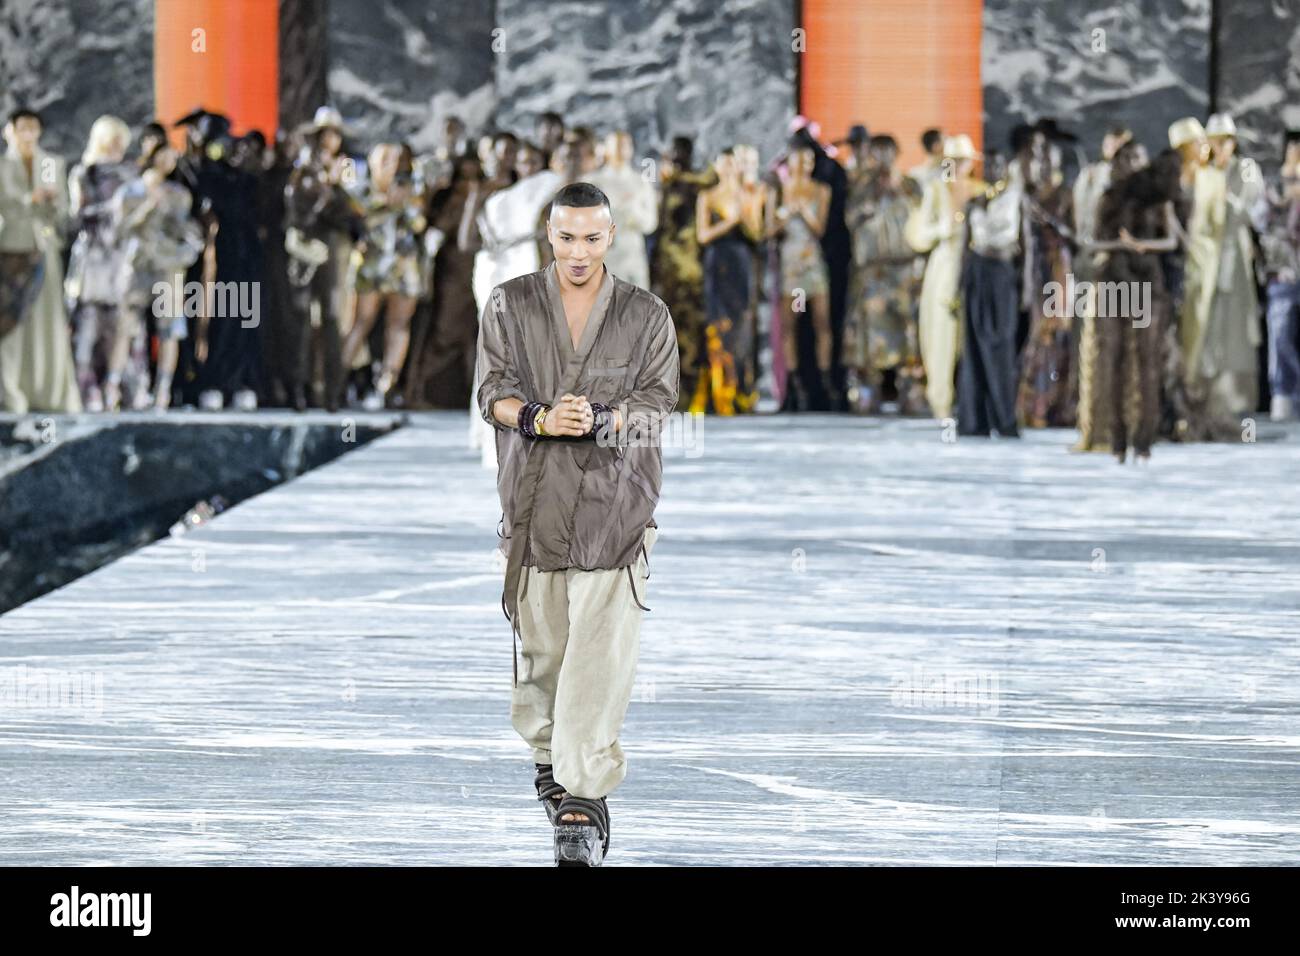 Paris, France. 28th Sep, 2022. Olivier Rousteing walks the runway during the Balmain Festival V03 show as part of Paris Fashion Week Womenswear Spring Summer 2023 in Paris, France, on September 28, 2022 in Paris, France. Photo by Jana Call me J/ABACAPRESS.COM Credit: Abaca Press/Alamy Live News Stock Photo